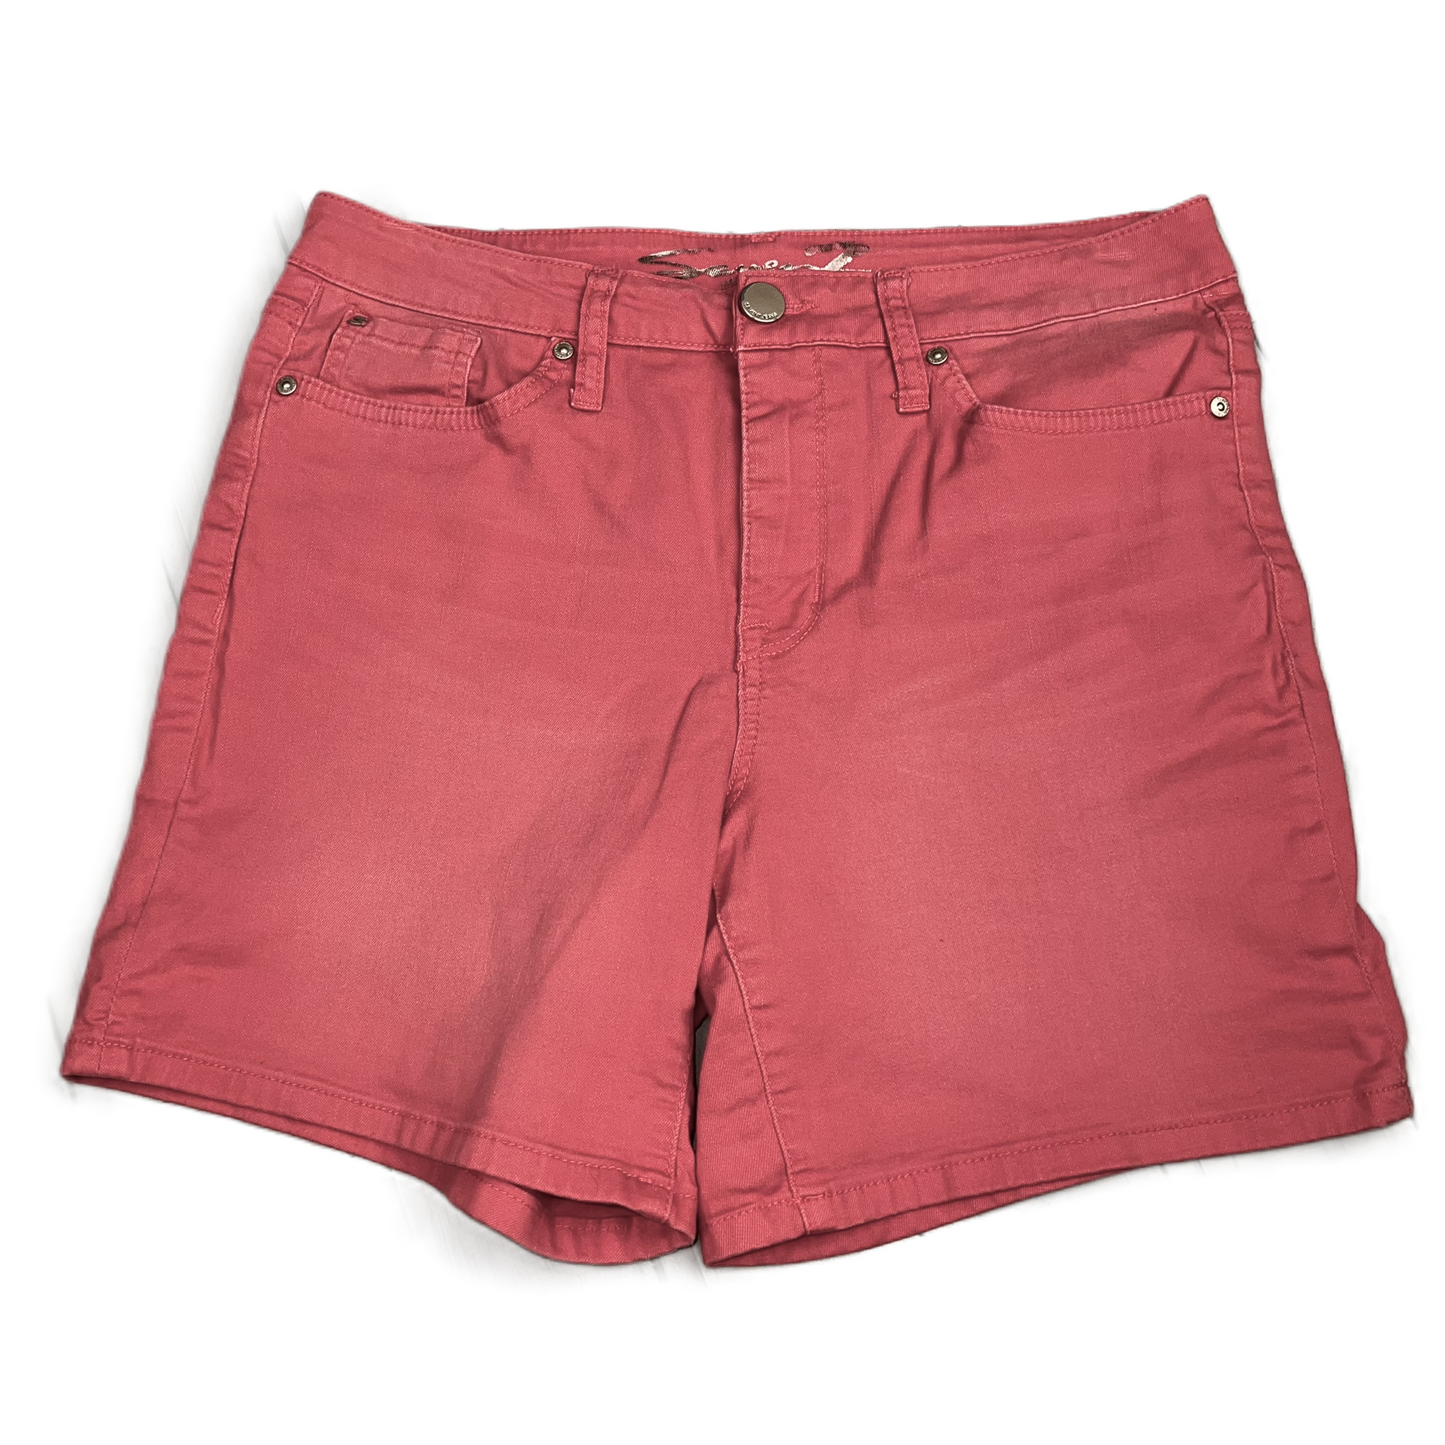 Pink Denim Shorts By Seven 7, Size: 10